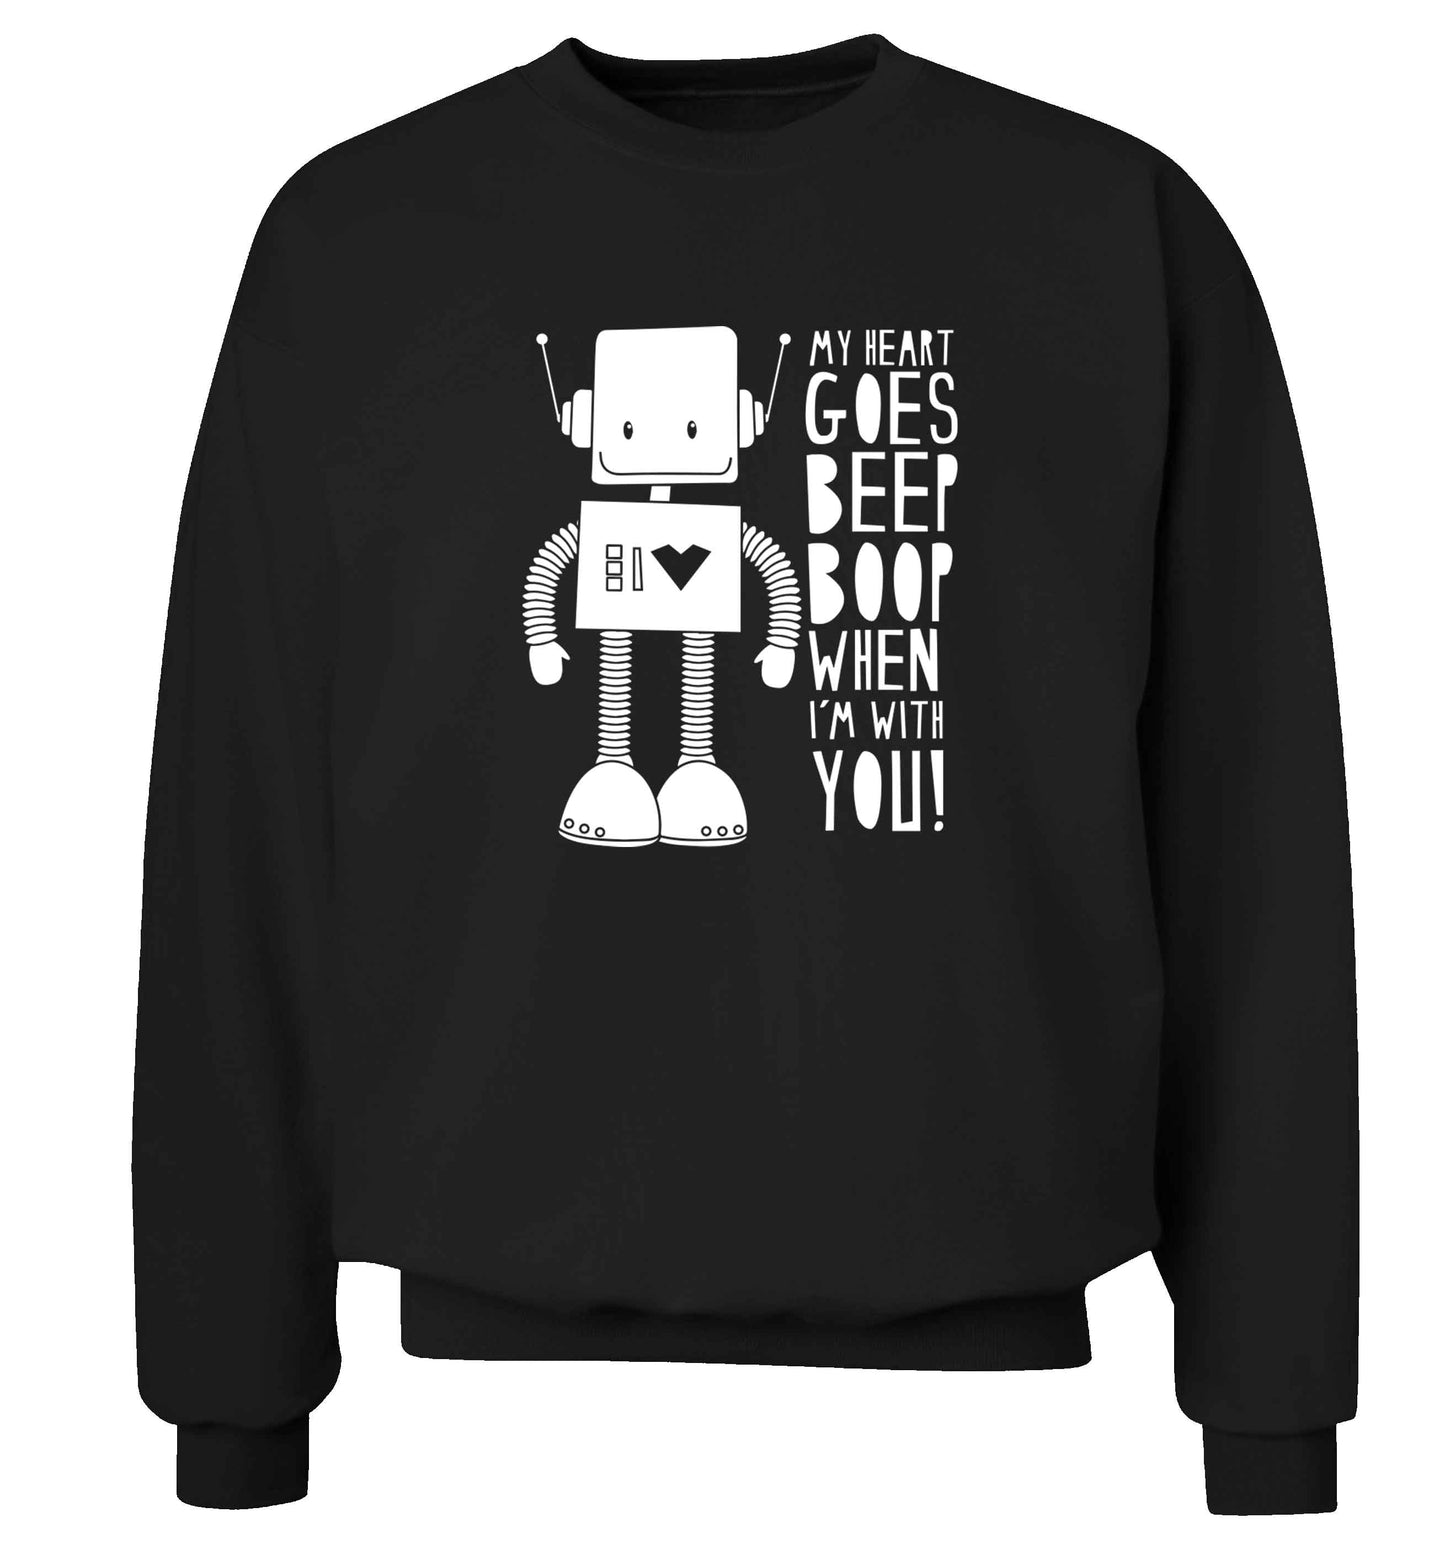 My heart goes beep boop when I'm with you adult's unisex black sweater 2XL